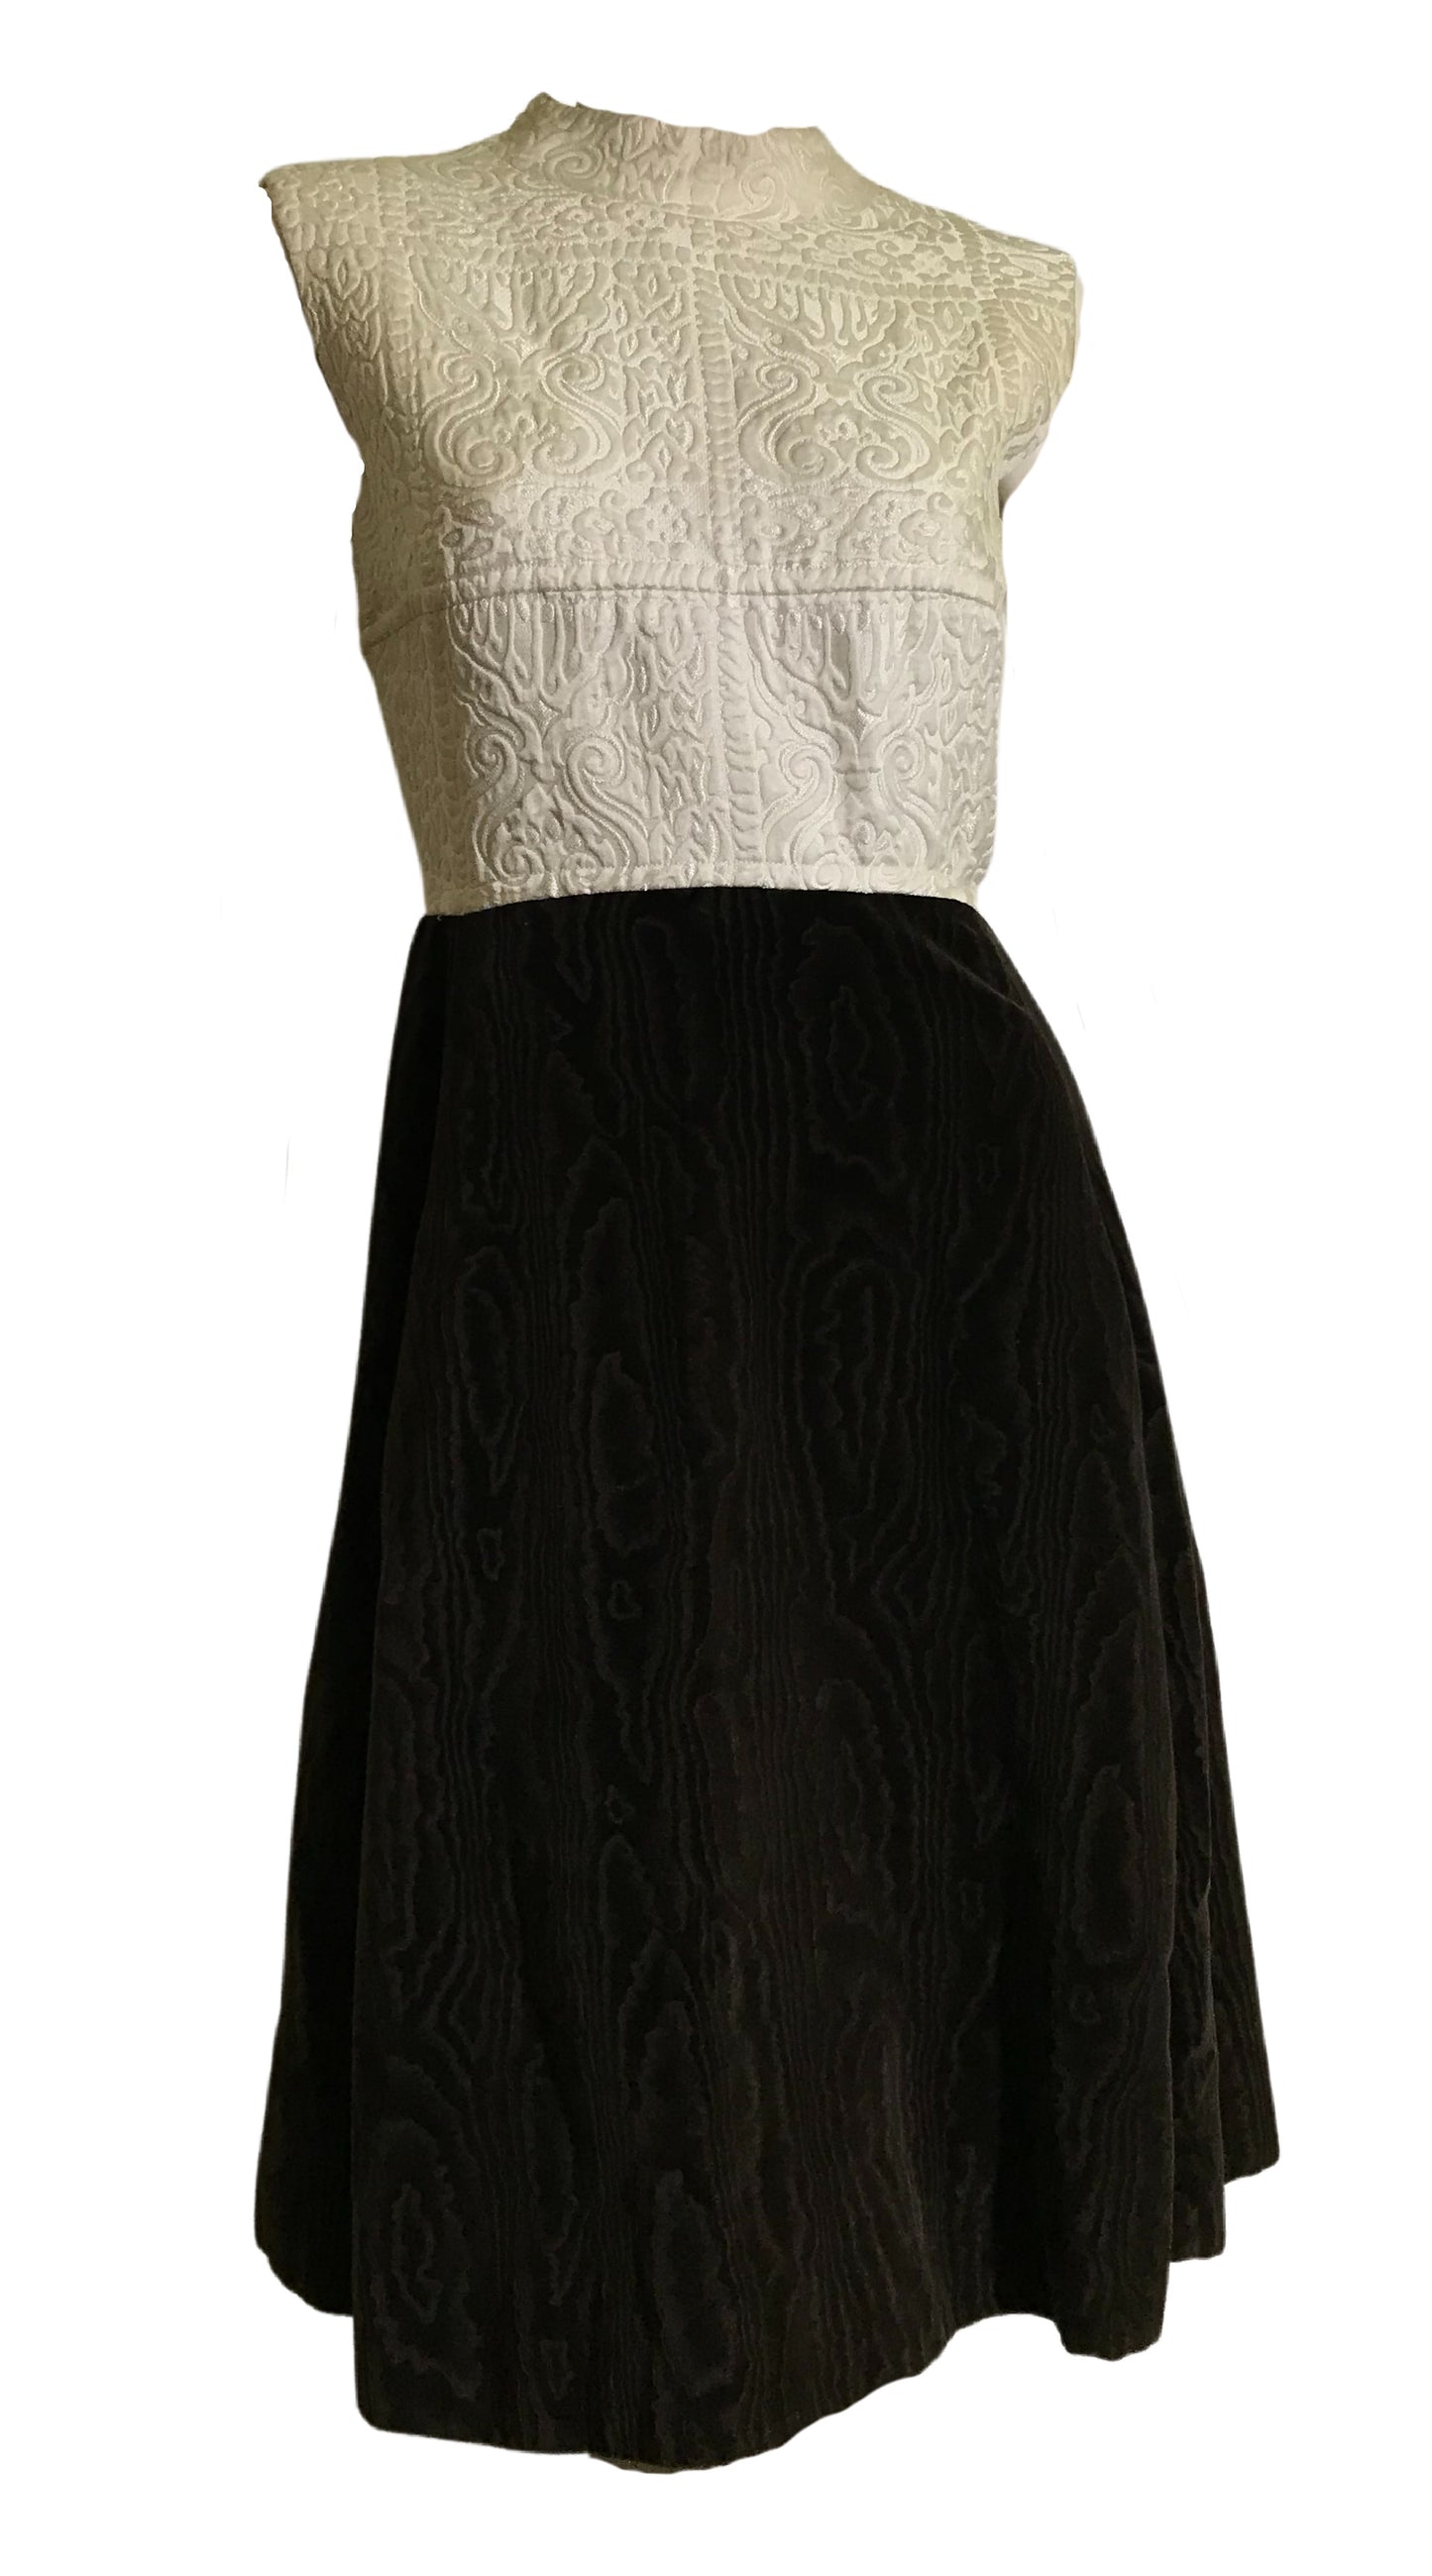 Malcolm Starr Woodgrain Brown Velvet and Sculpted Silk Bodice Dress with Matching Jacket circa 1960s